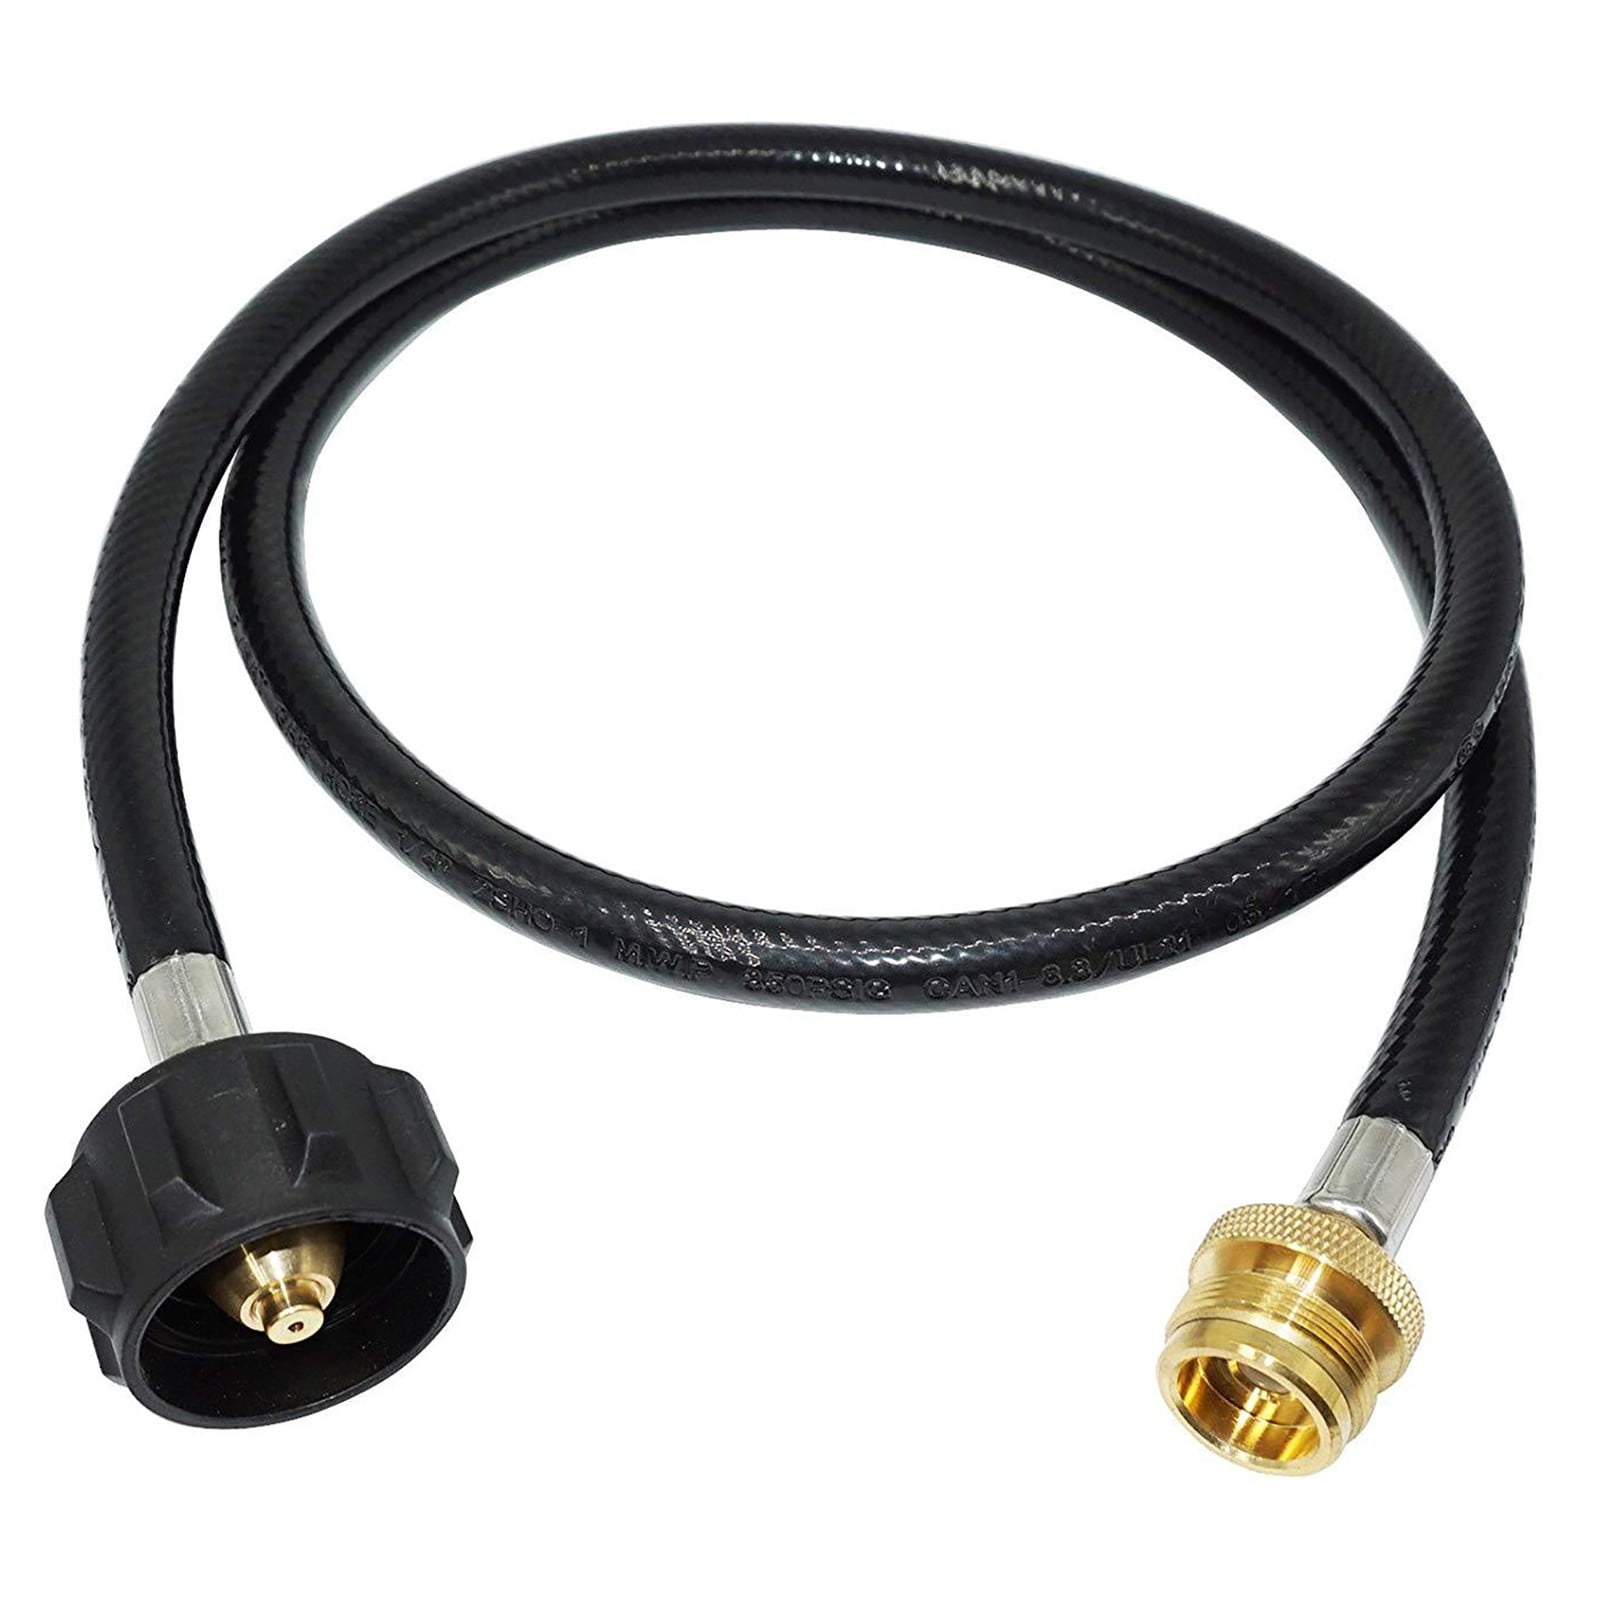 SHINESTAR Propane Adapter Hose 1 lb to 20 lb Converter Replacement for QCC1/T 